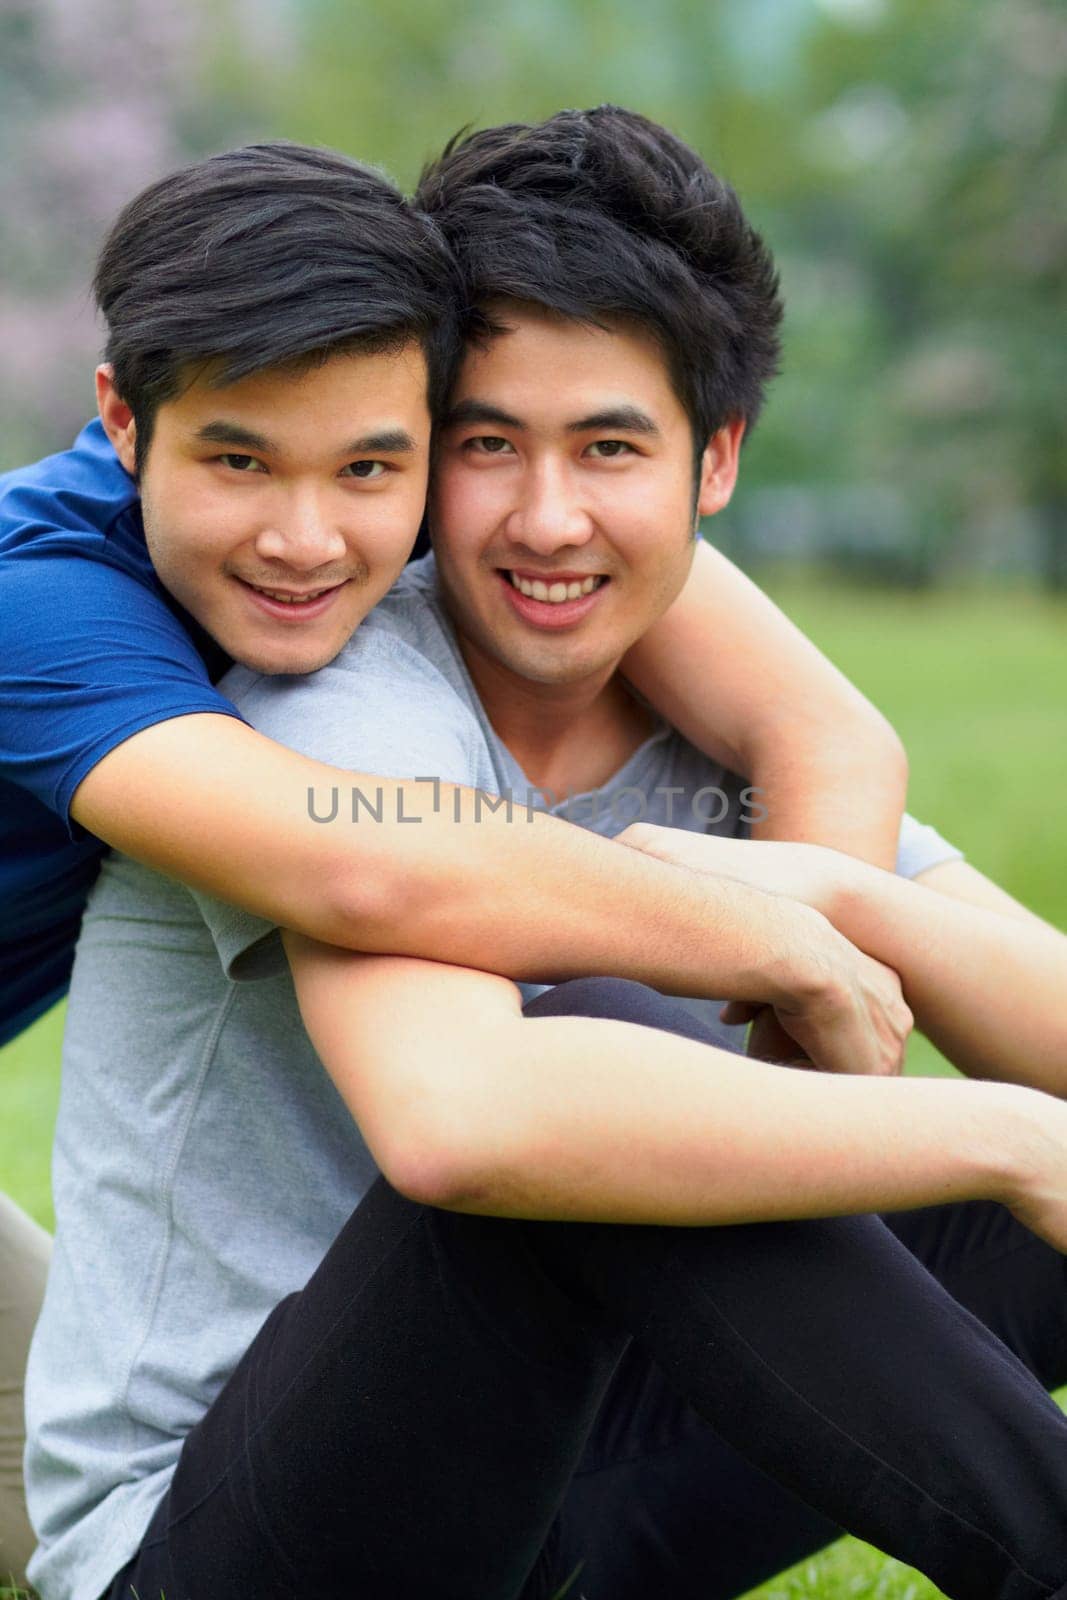 Asian men, gay couple and hug in park portrait, grass or garden with love, care and bonding in summer sunshine. Happy Japanese guy, romance or relax together on lawn with lgbtq, nature and holiday.